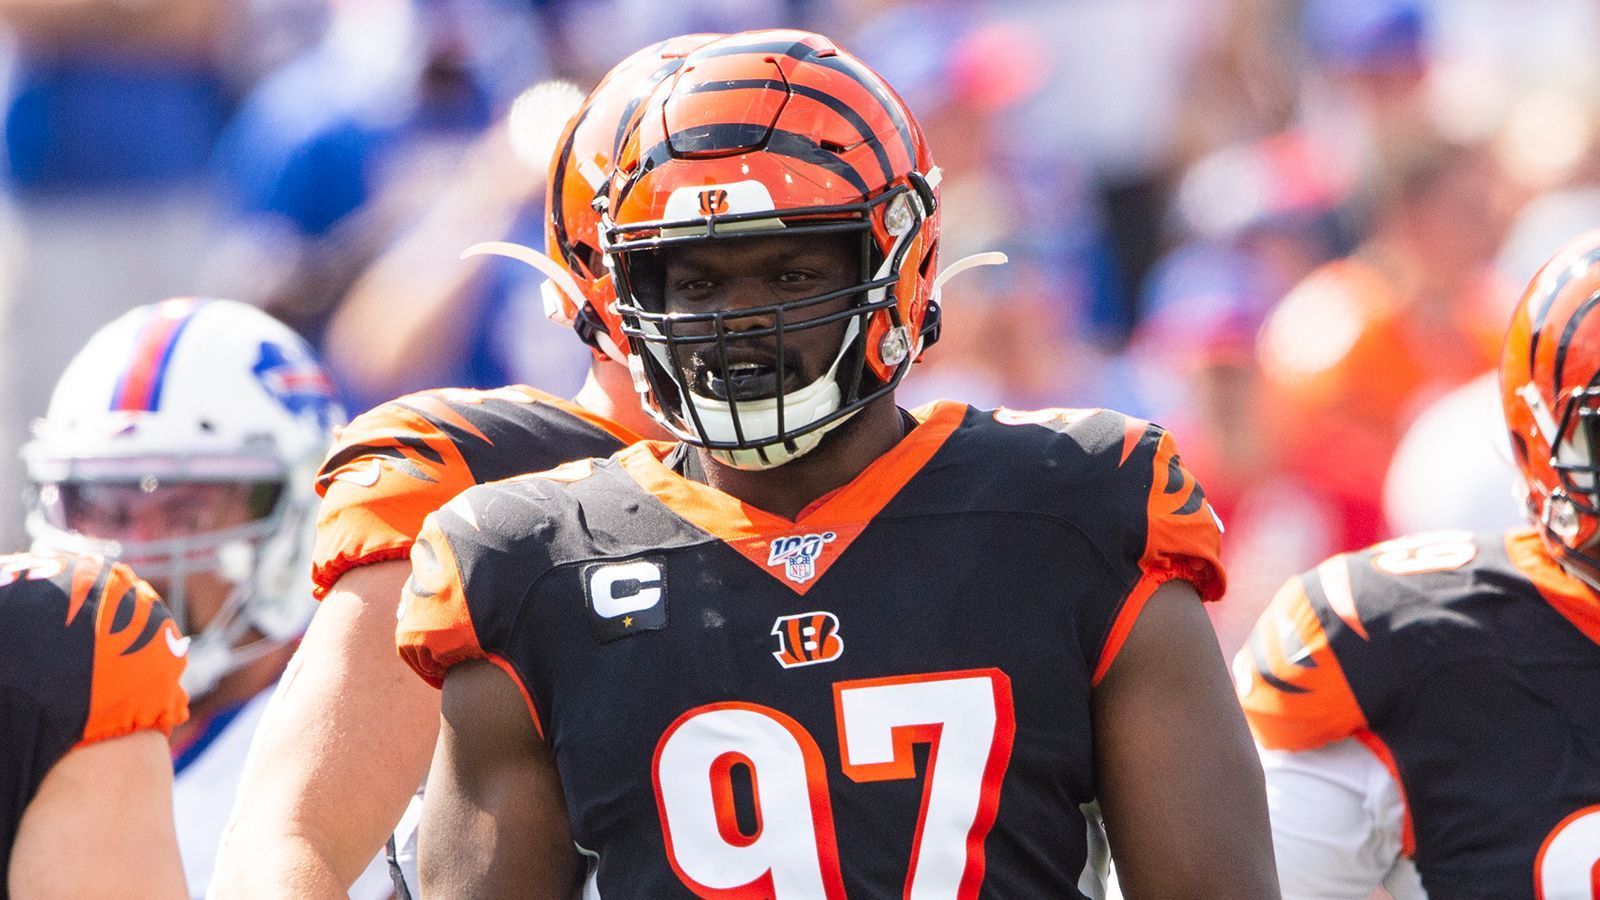 <strong>97: Geno Atkins<br></strong>Team: Cincinnati Bengals<br>Position: Defensive Tackle<br>Erfolge: zweimaliger First Team All-Pro, achtmaliger Pro Bowler<br>Honorable Mentions: Bryant Young, Simeon Rice